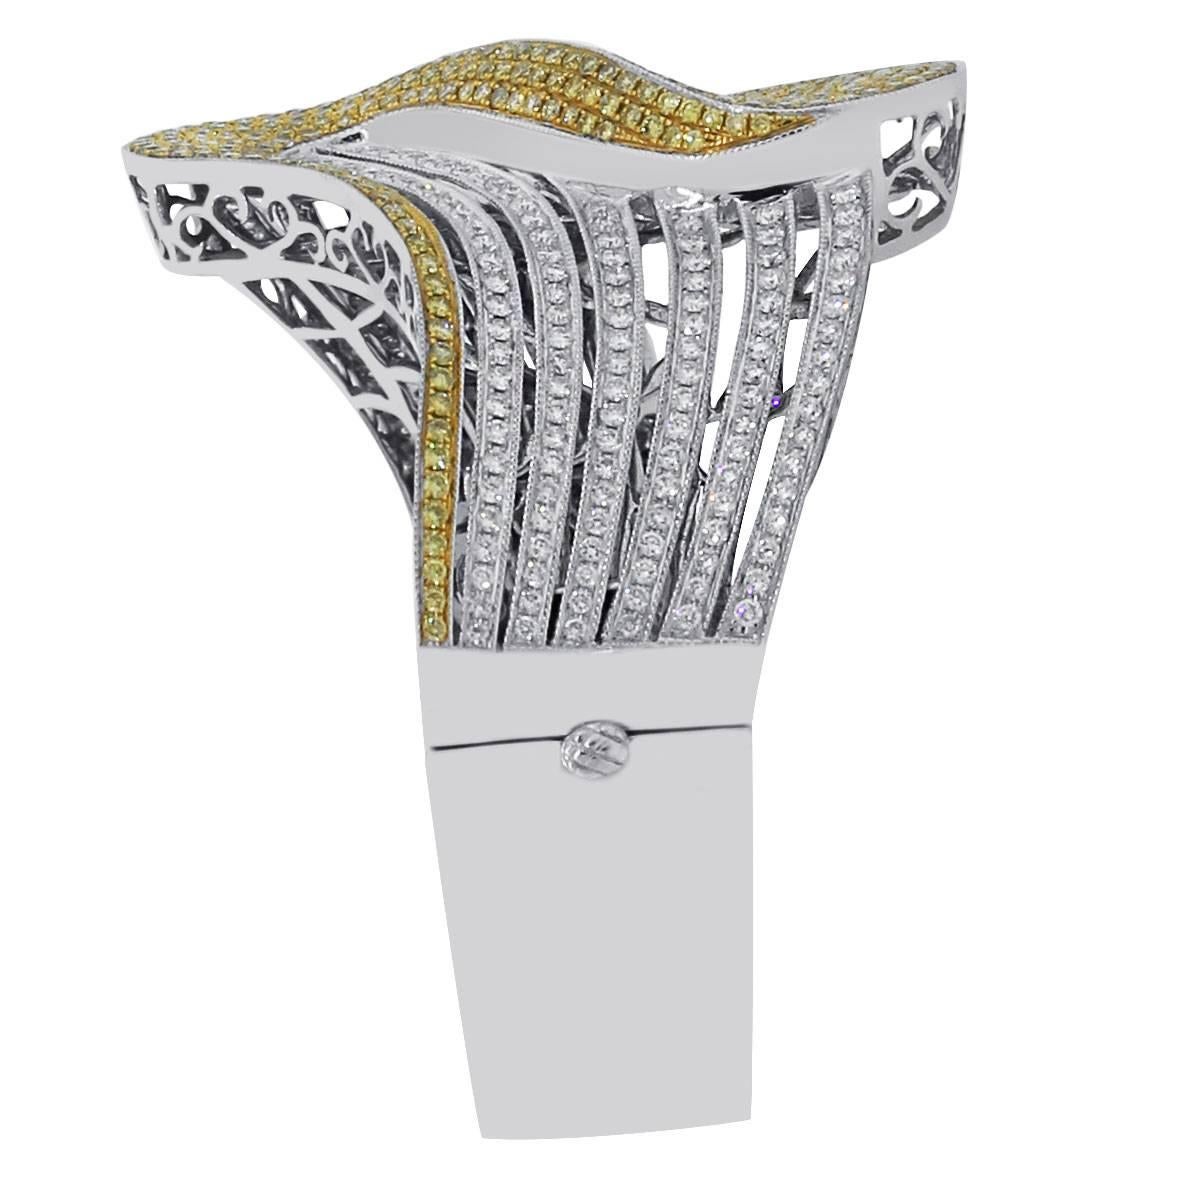 Material: 18k two tone gold
Diamond Details: Approximately 4.43ctw yellow round brilliant diamonds and approximately 4.25ctw white round brilliant diamonds. Diamonds are G/H in color and VS in clarity.
Clasp: Tongue in box clasp
Measurements: 7″ x